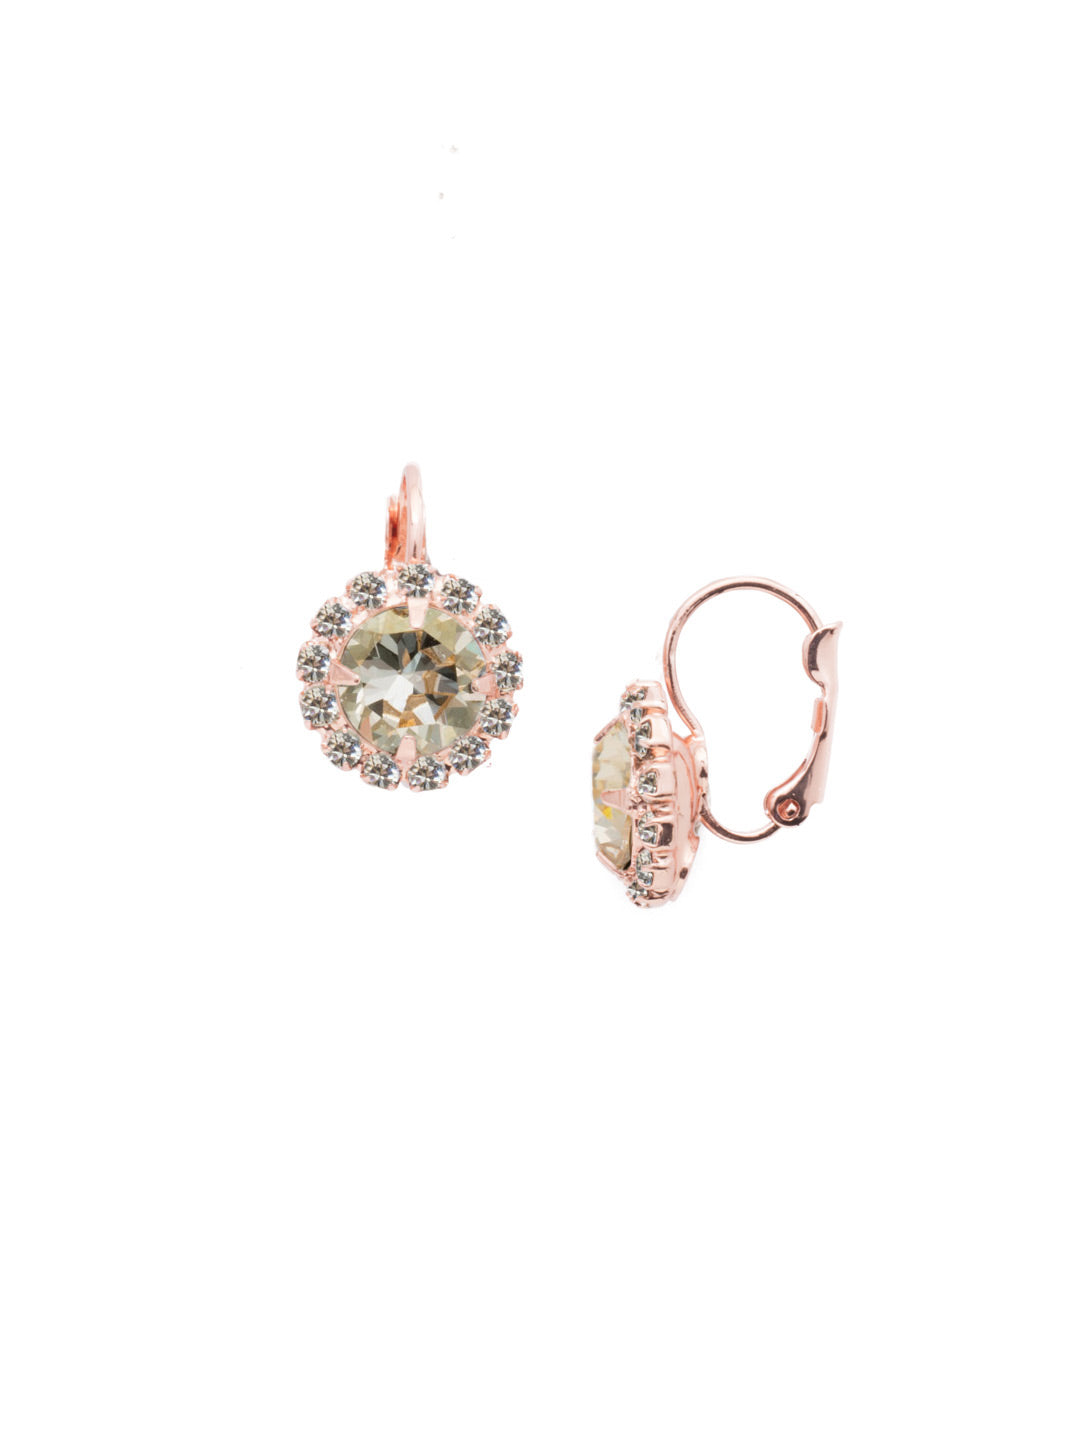 Haute Halo Dangle Earrings - EDL10RGCCH - <p>A central round crystal with an elegant halo of gems embodies elegance and style. From Sorrelli's Crystal Champagne collection in our Rose Gold-tone finish.</p>